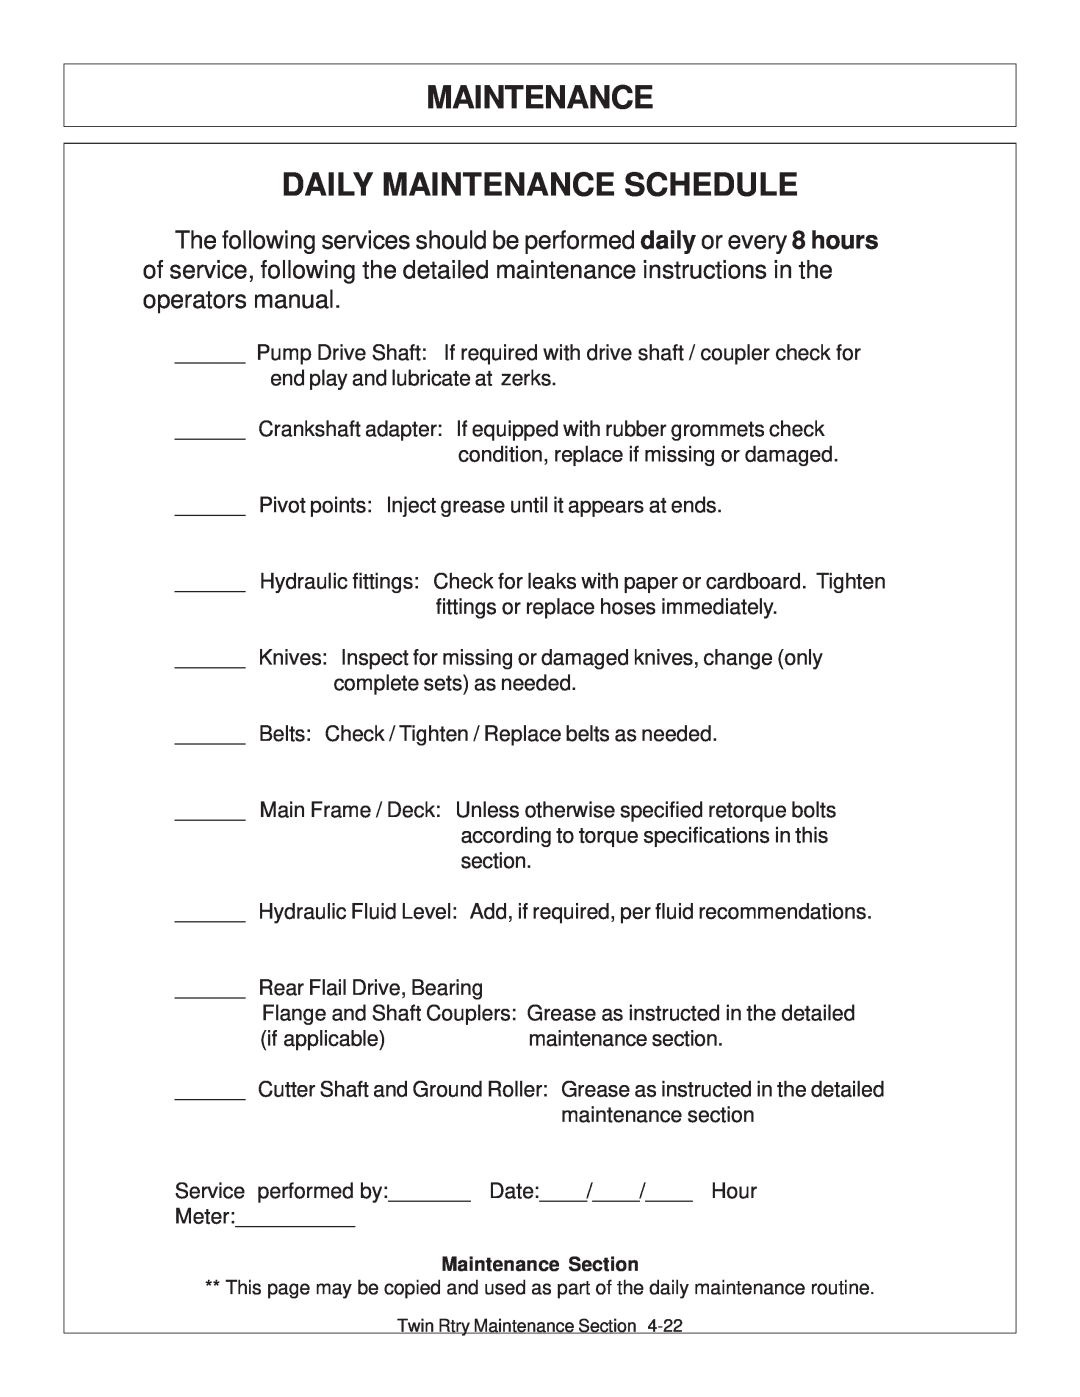 Tiger Products Co., Ltd 6020009 manual Maintenance Daily Maintenance Schedule, Maintenance Section 